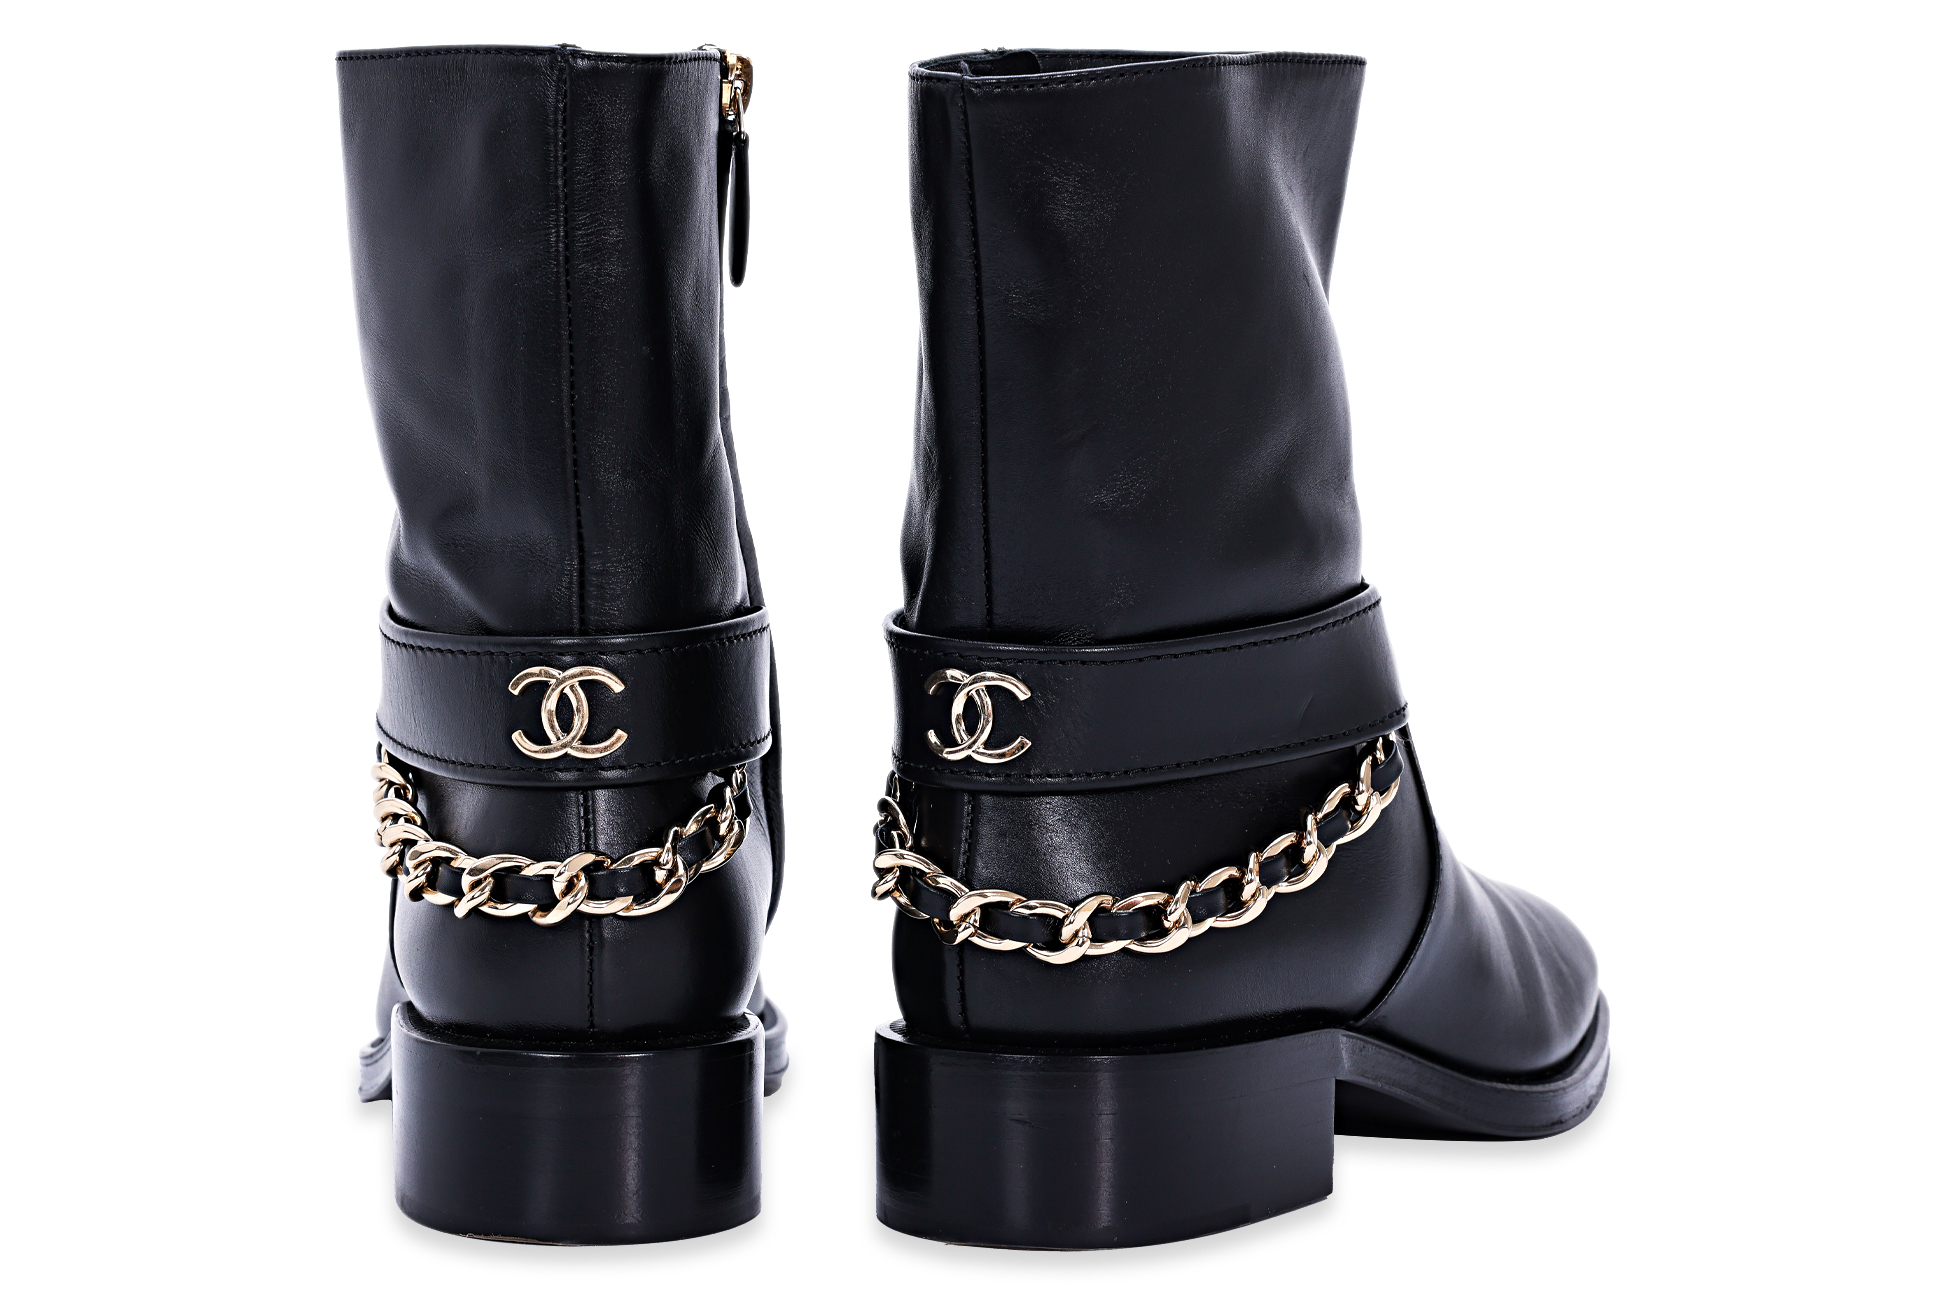 A PAIR OF CHANEL LEATHER ANKLE MOTO BOOTS - Image 3 of 12